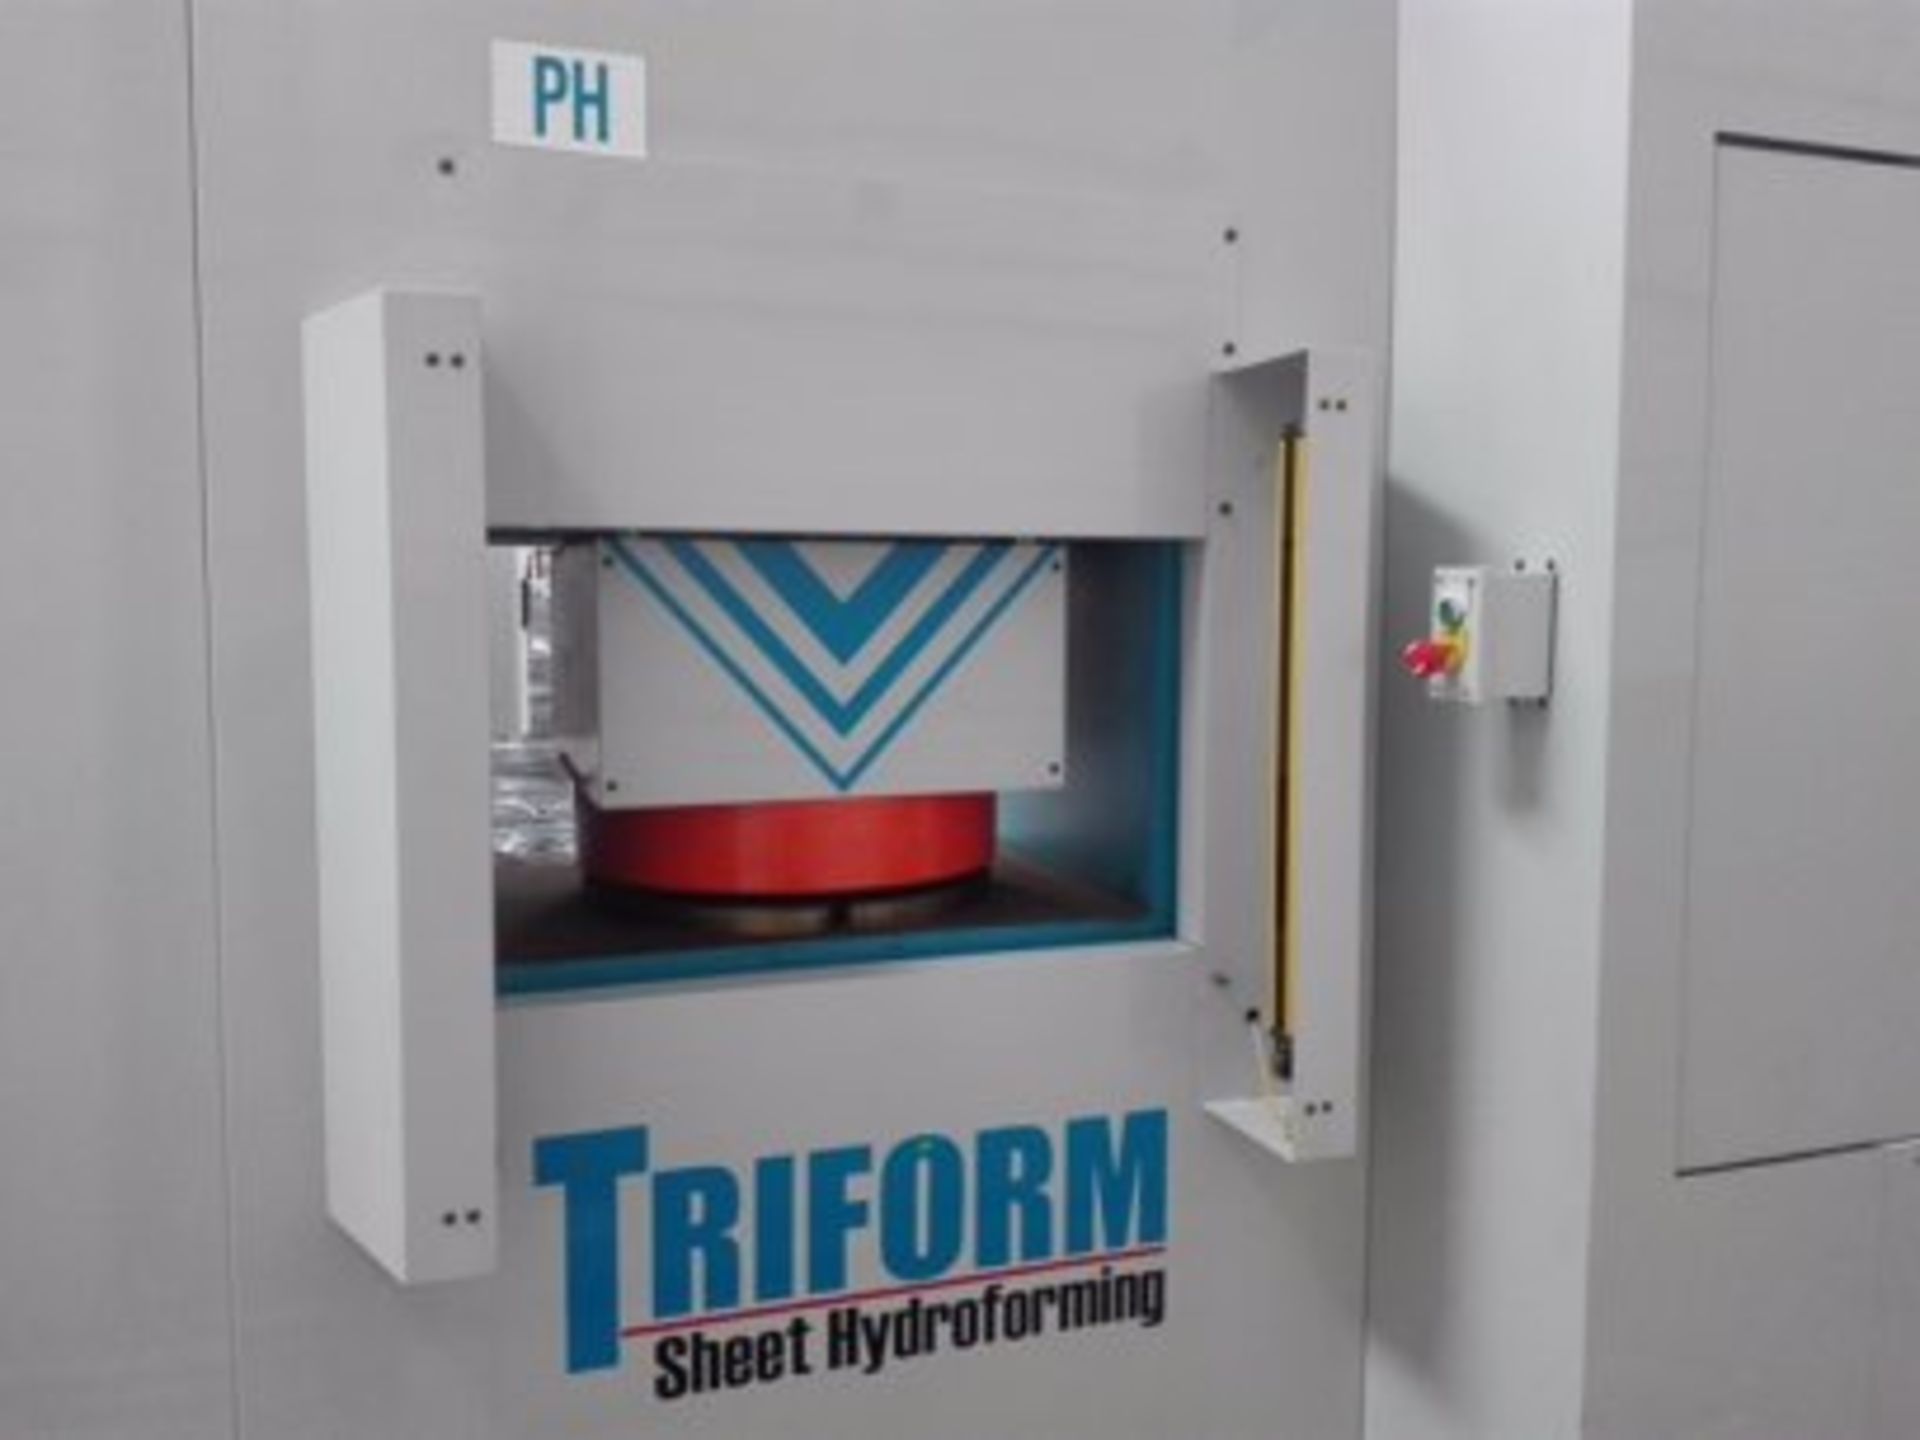 TRIFORM HYDROFORMING MDL:12-10-7BD DEEP DRAW PRESS, ** BRAND NEW. NEVER INSTALLED ** 565 TON - Image 2 of 2